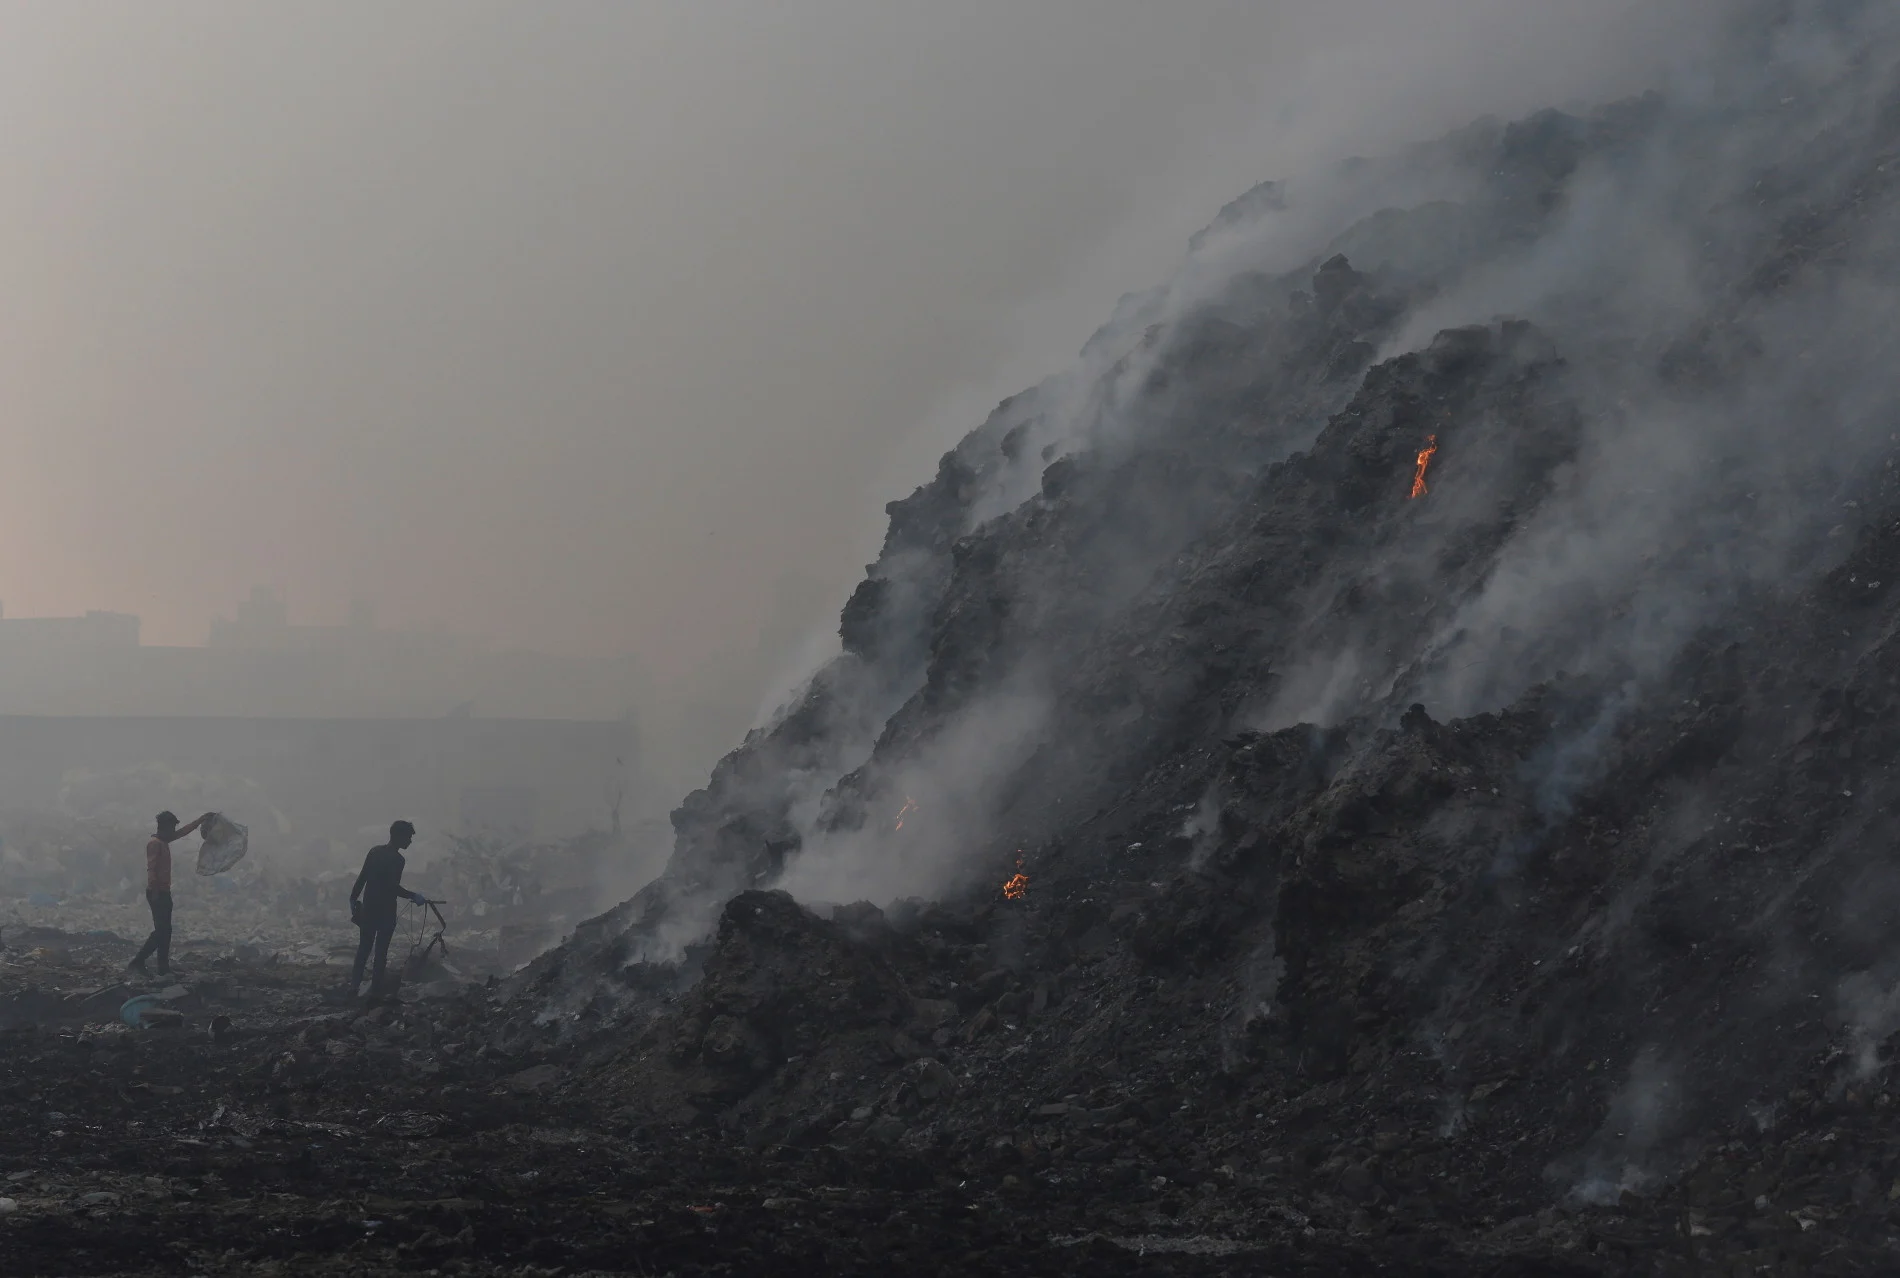  Waste collectors look for recyclable materials as smoke billows from burning garbage at the Bhalswa landfill site in New Delhi, India, April 27, 2022. (REUTERS/Adnan Abidi)